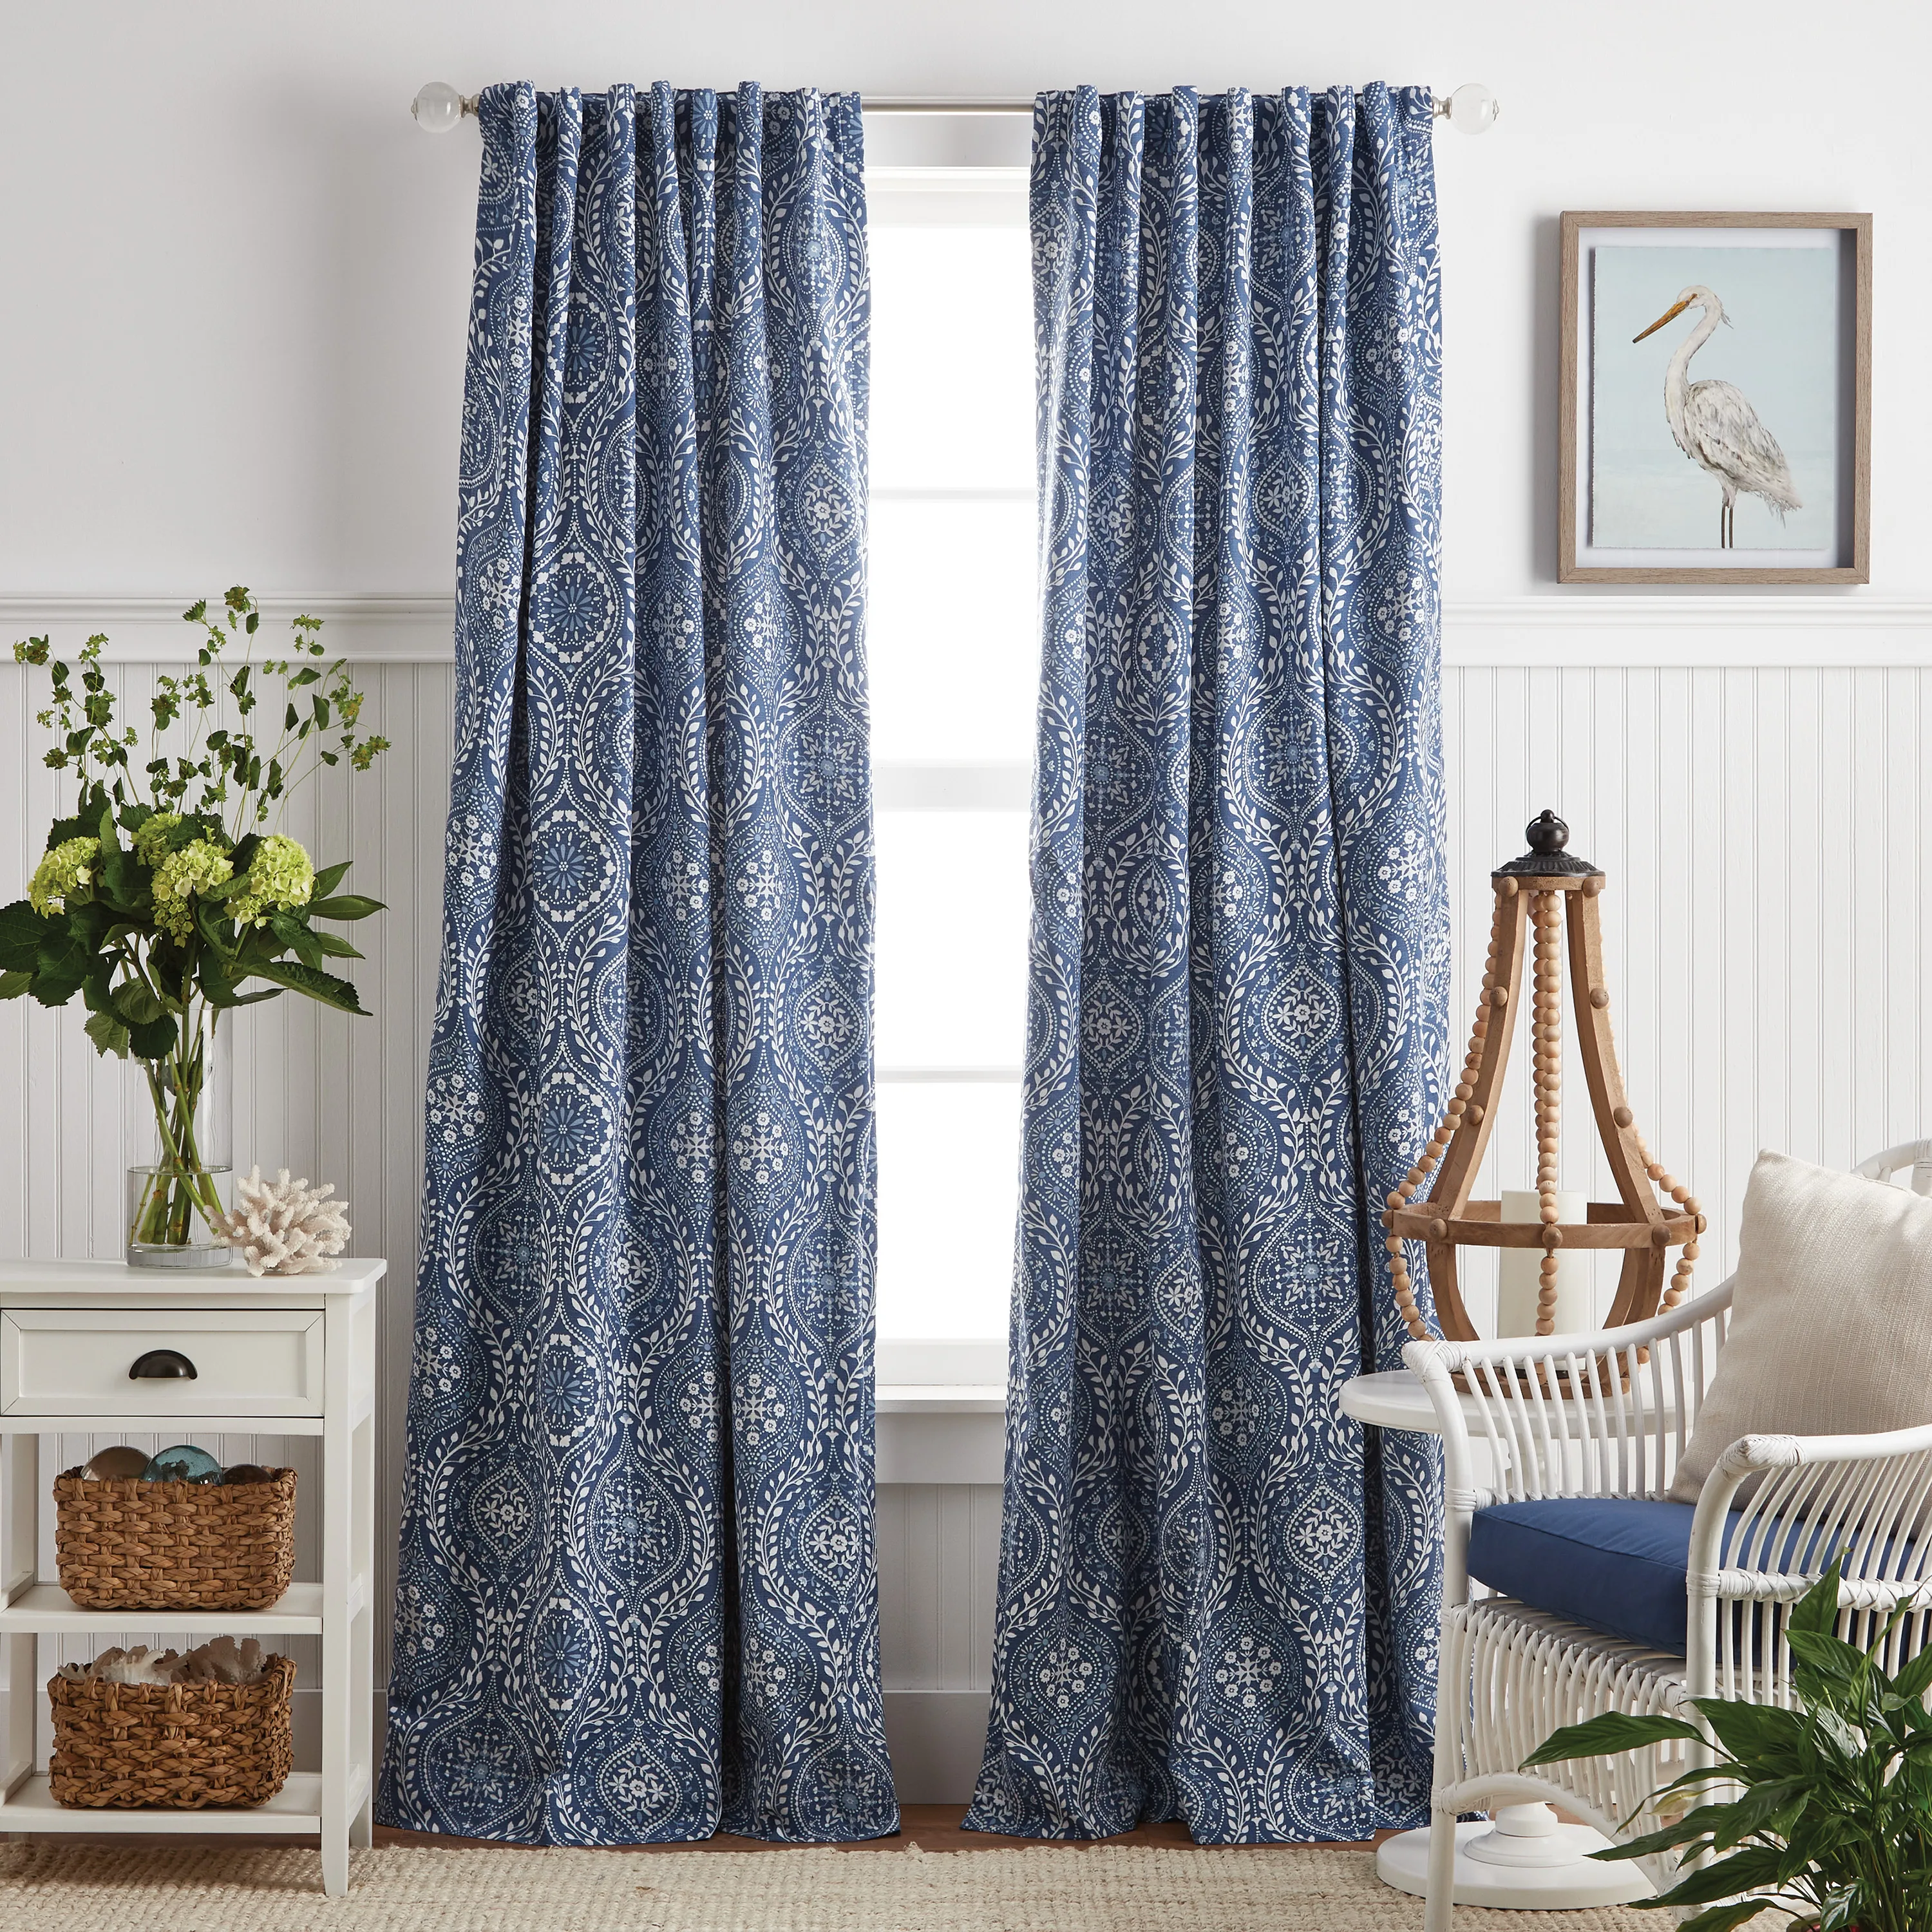 

Bandana Indoor Poly Cotton Blend Blackout Backtab Curtain Panel Pair, Indigo ,50"x84" ,Set of 2 Curtains for Living Room Luxury